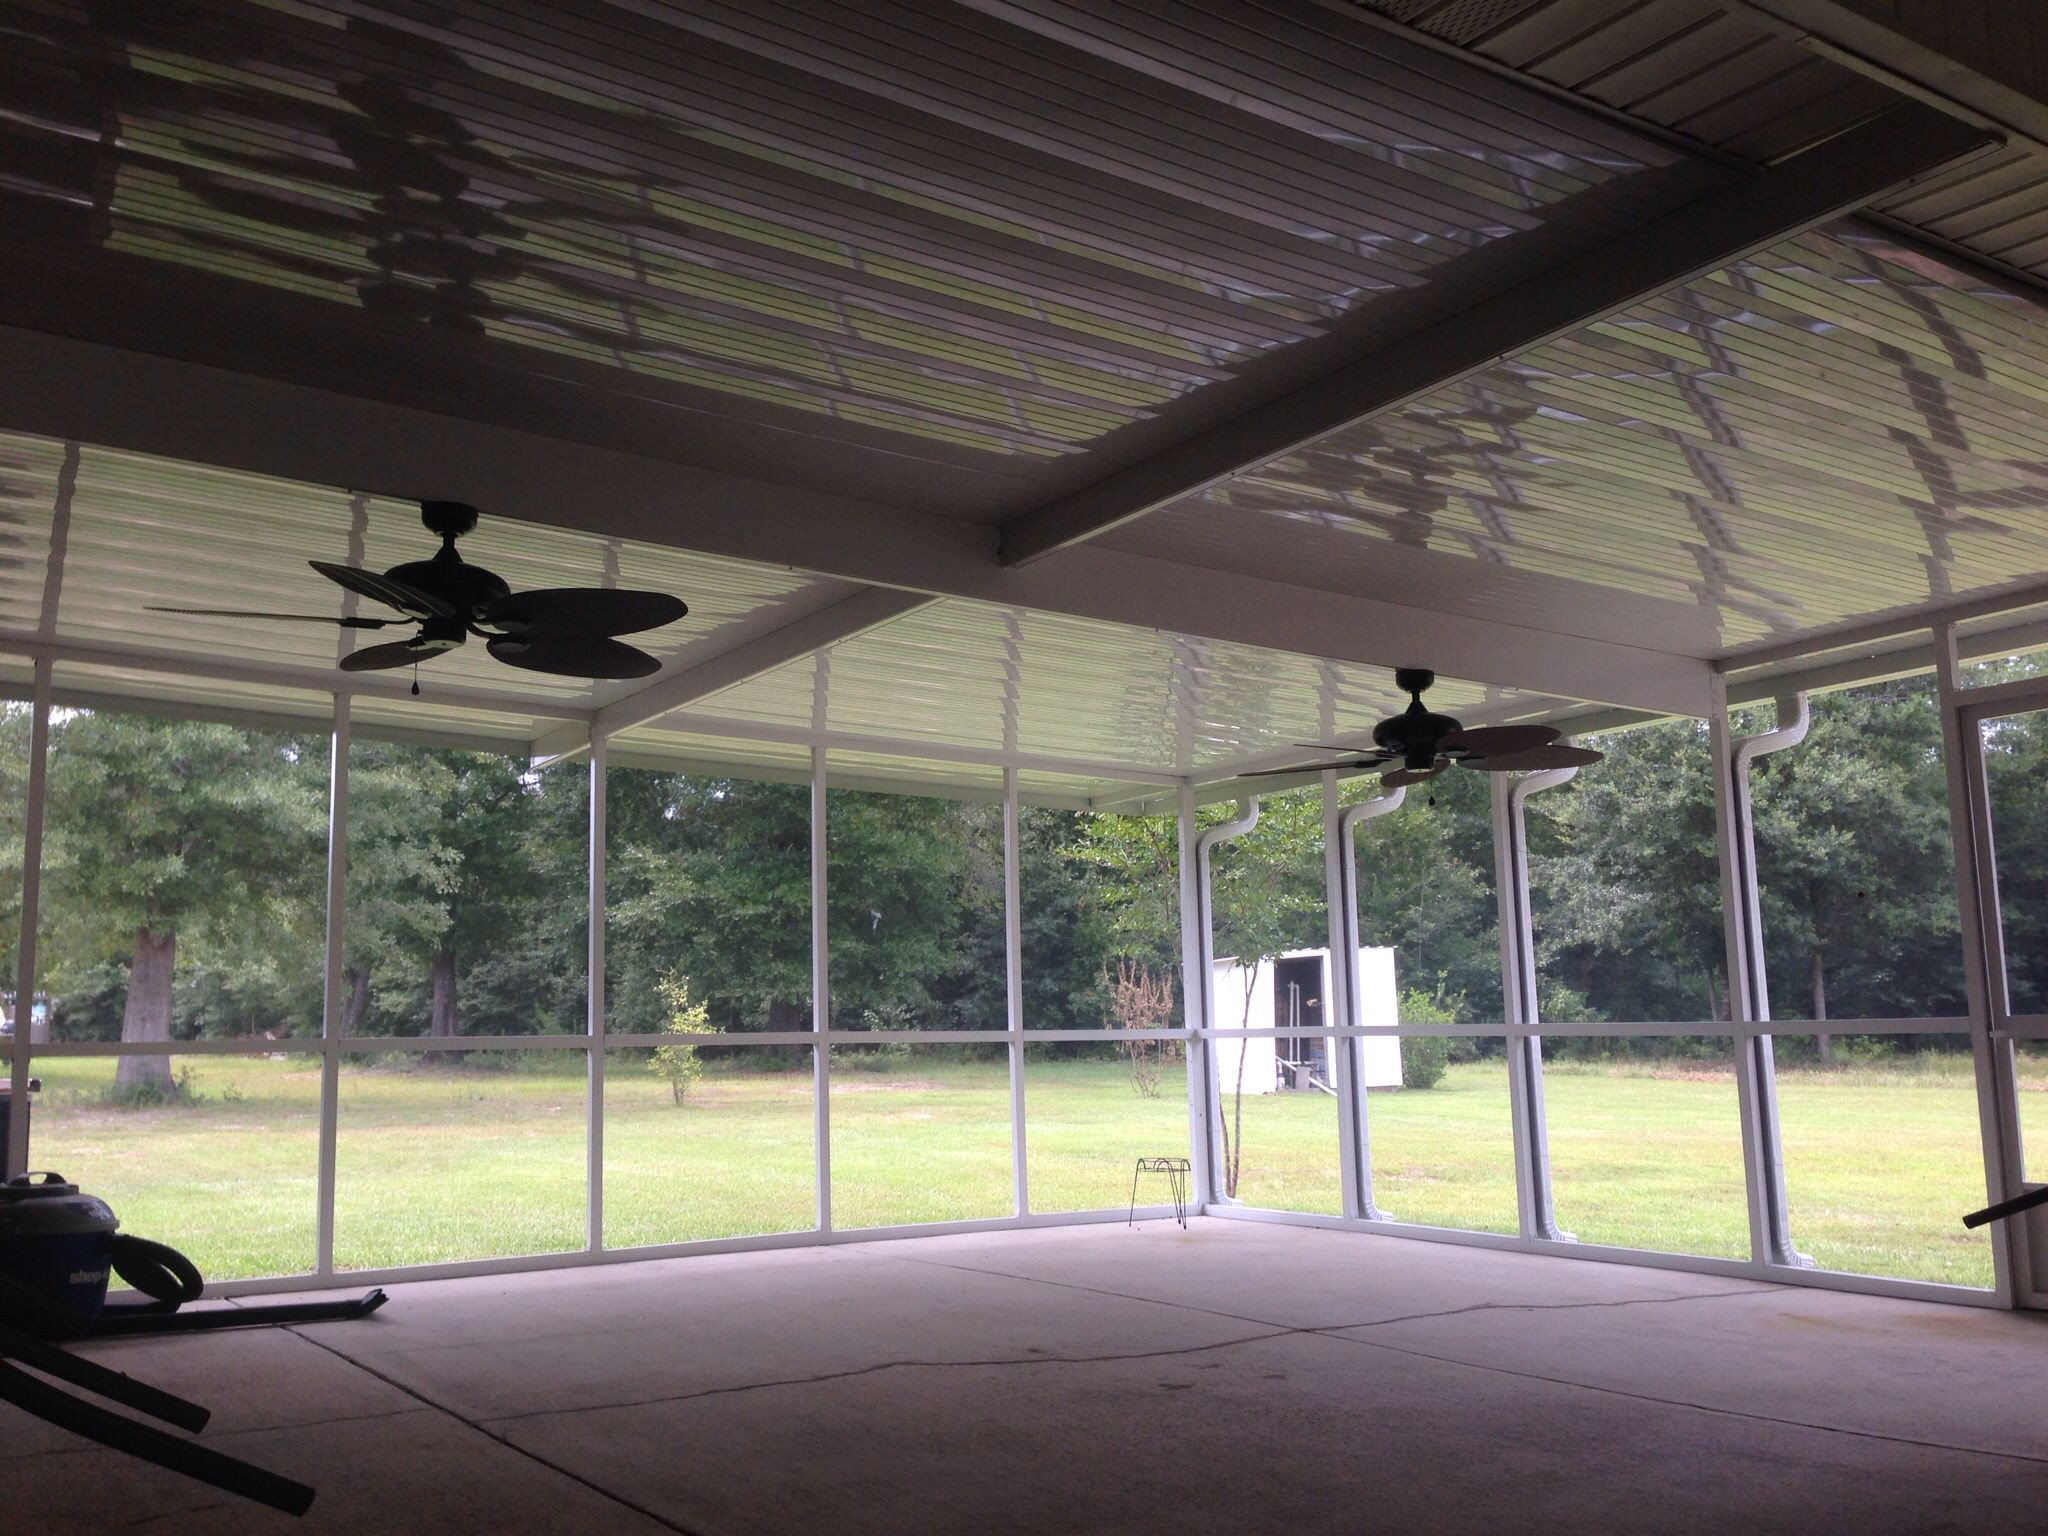 16 28 Screened Patio Cover 9 Center Beam With Wire pertaining to size 2048 X 1536